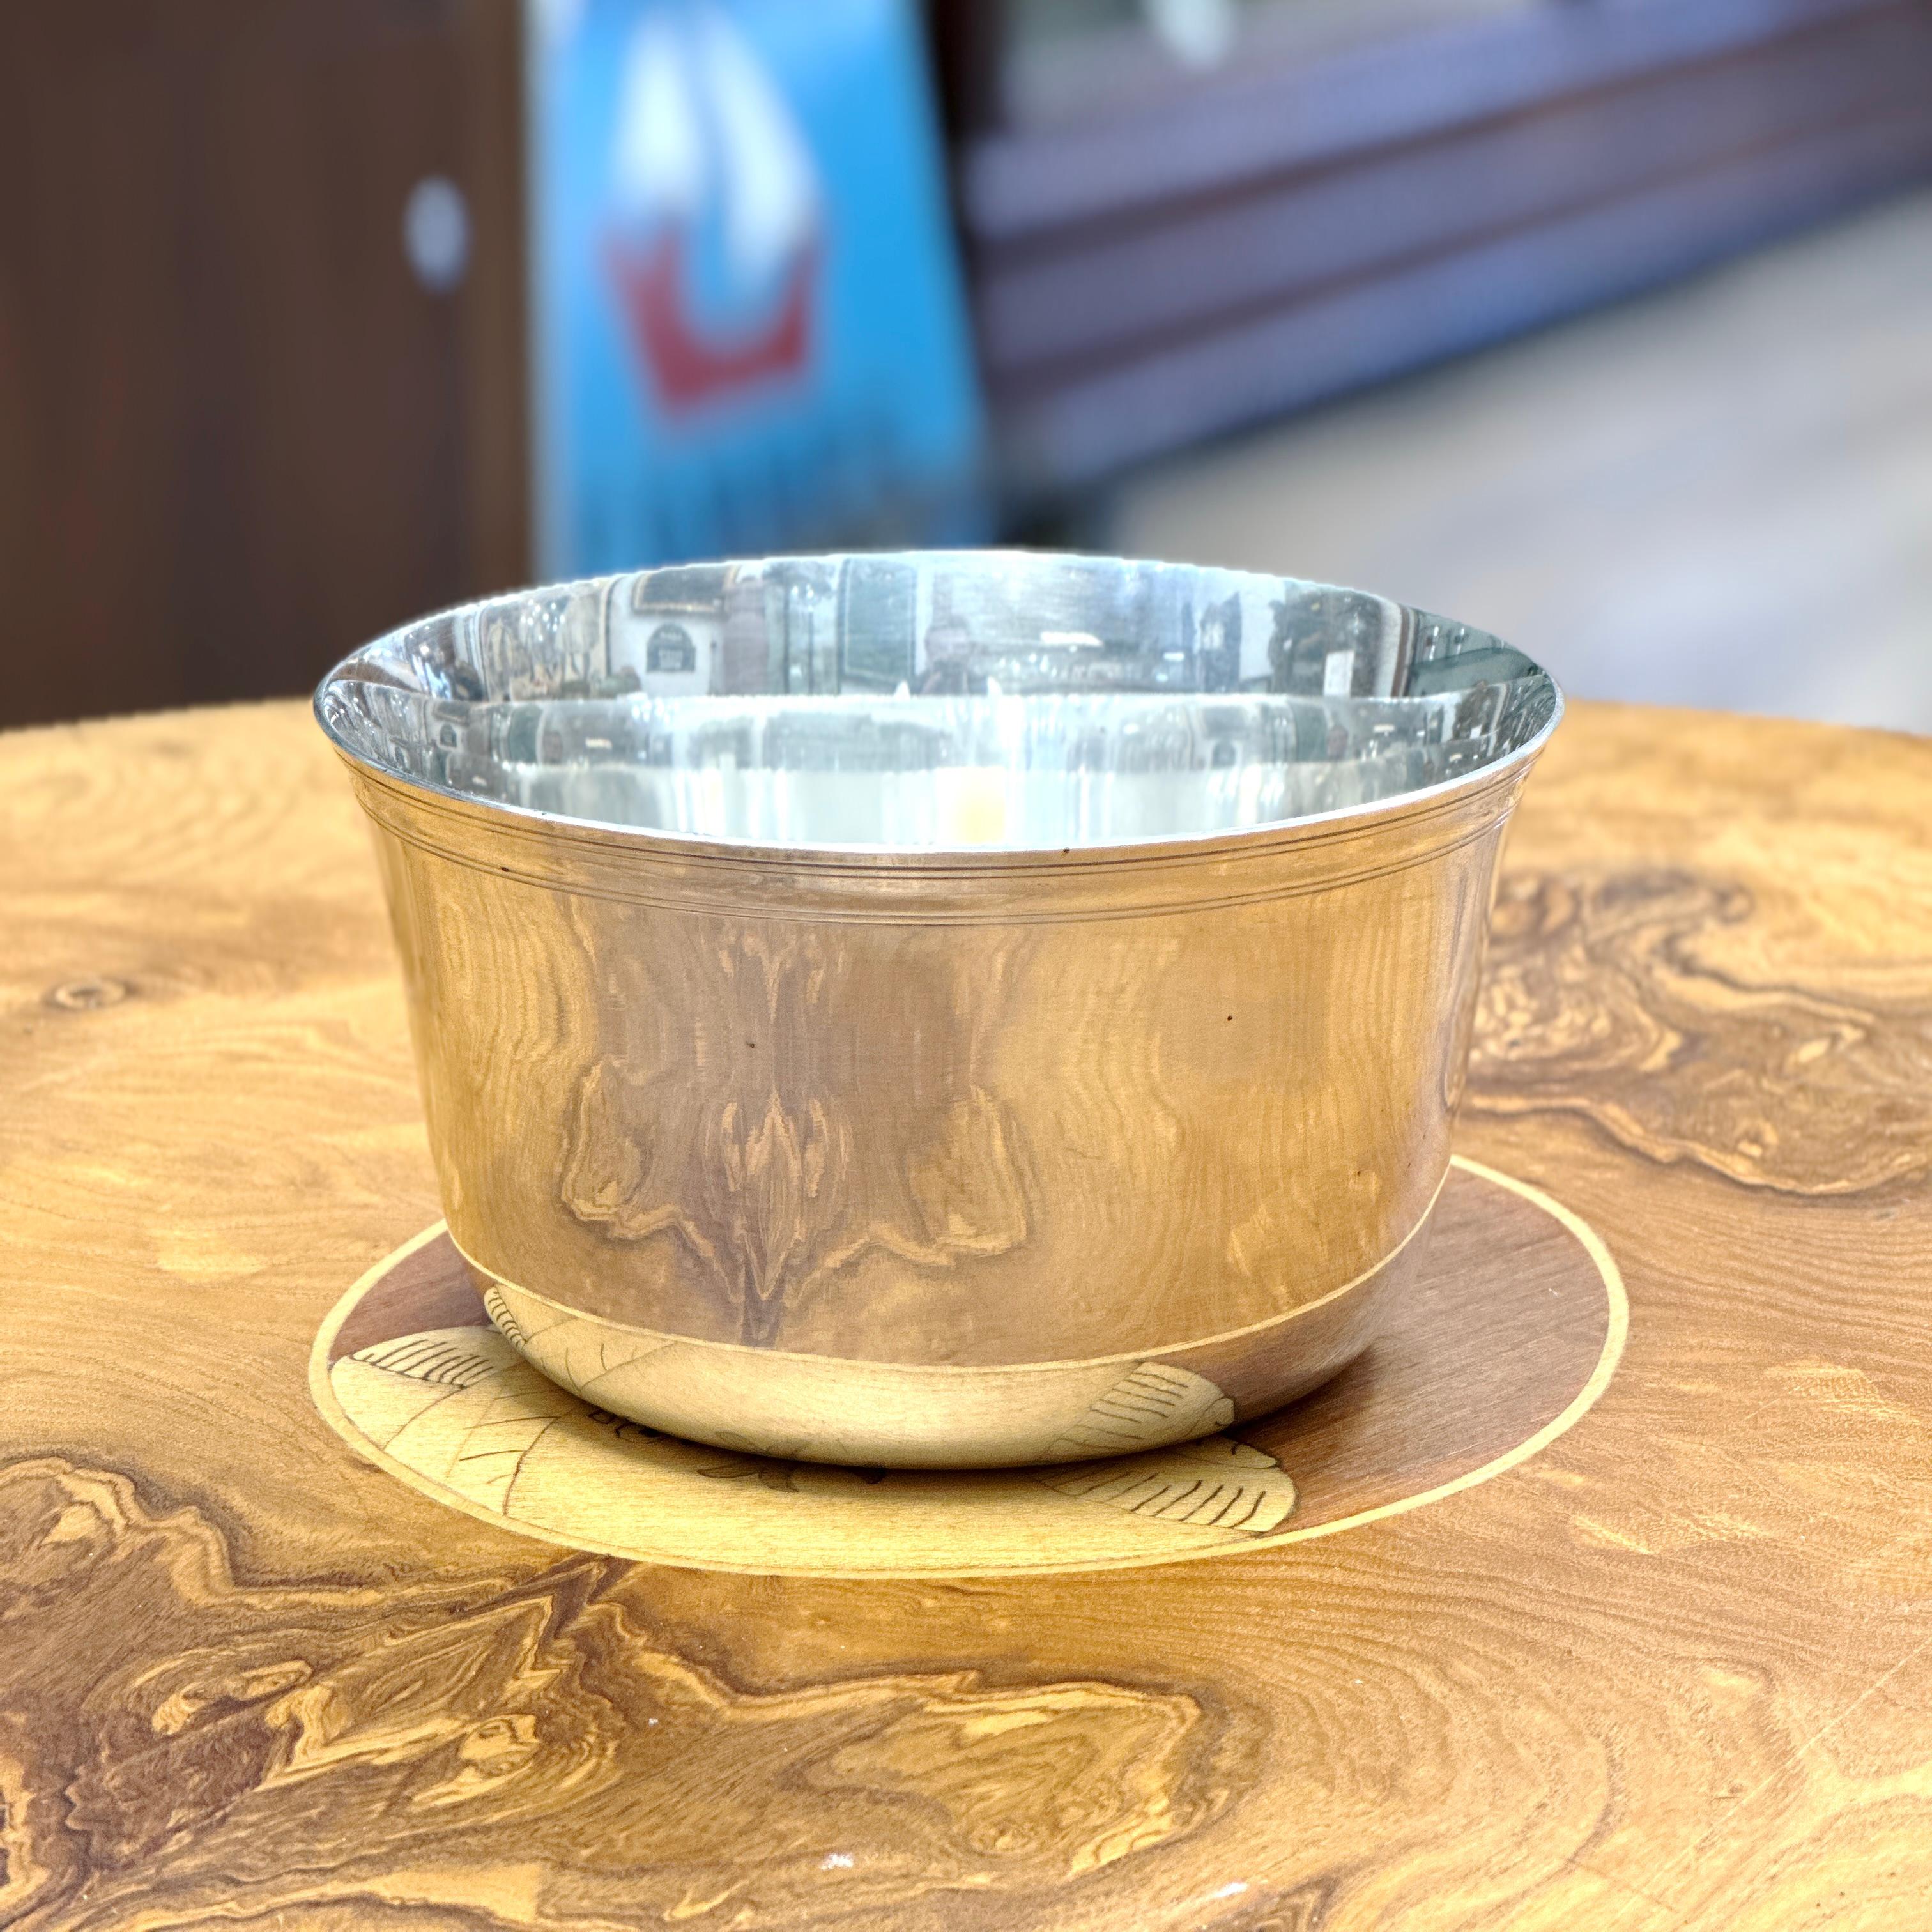 Here is a lovely Silver Metal Bowl produced by Hermes. This piece features simple and classic design with a linear decoration on the upper edge. Made in France circa 1980s

Good general condition, some small signs due to normal use over